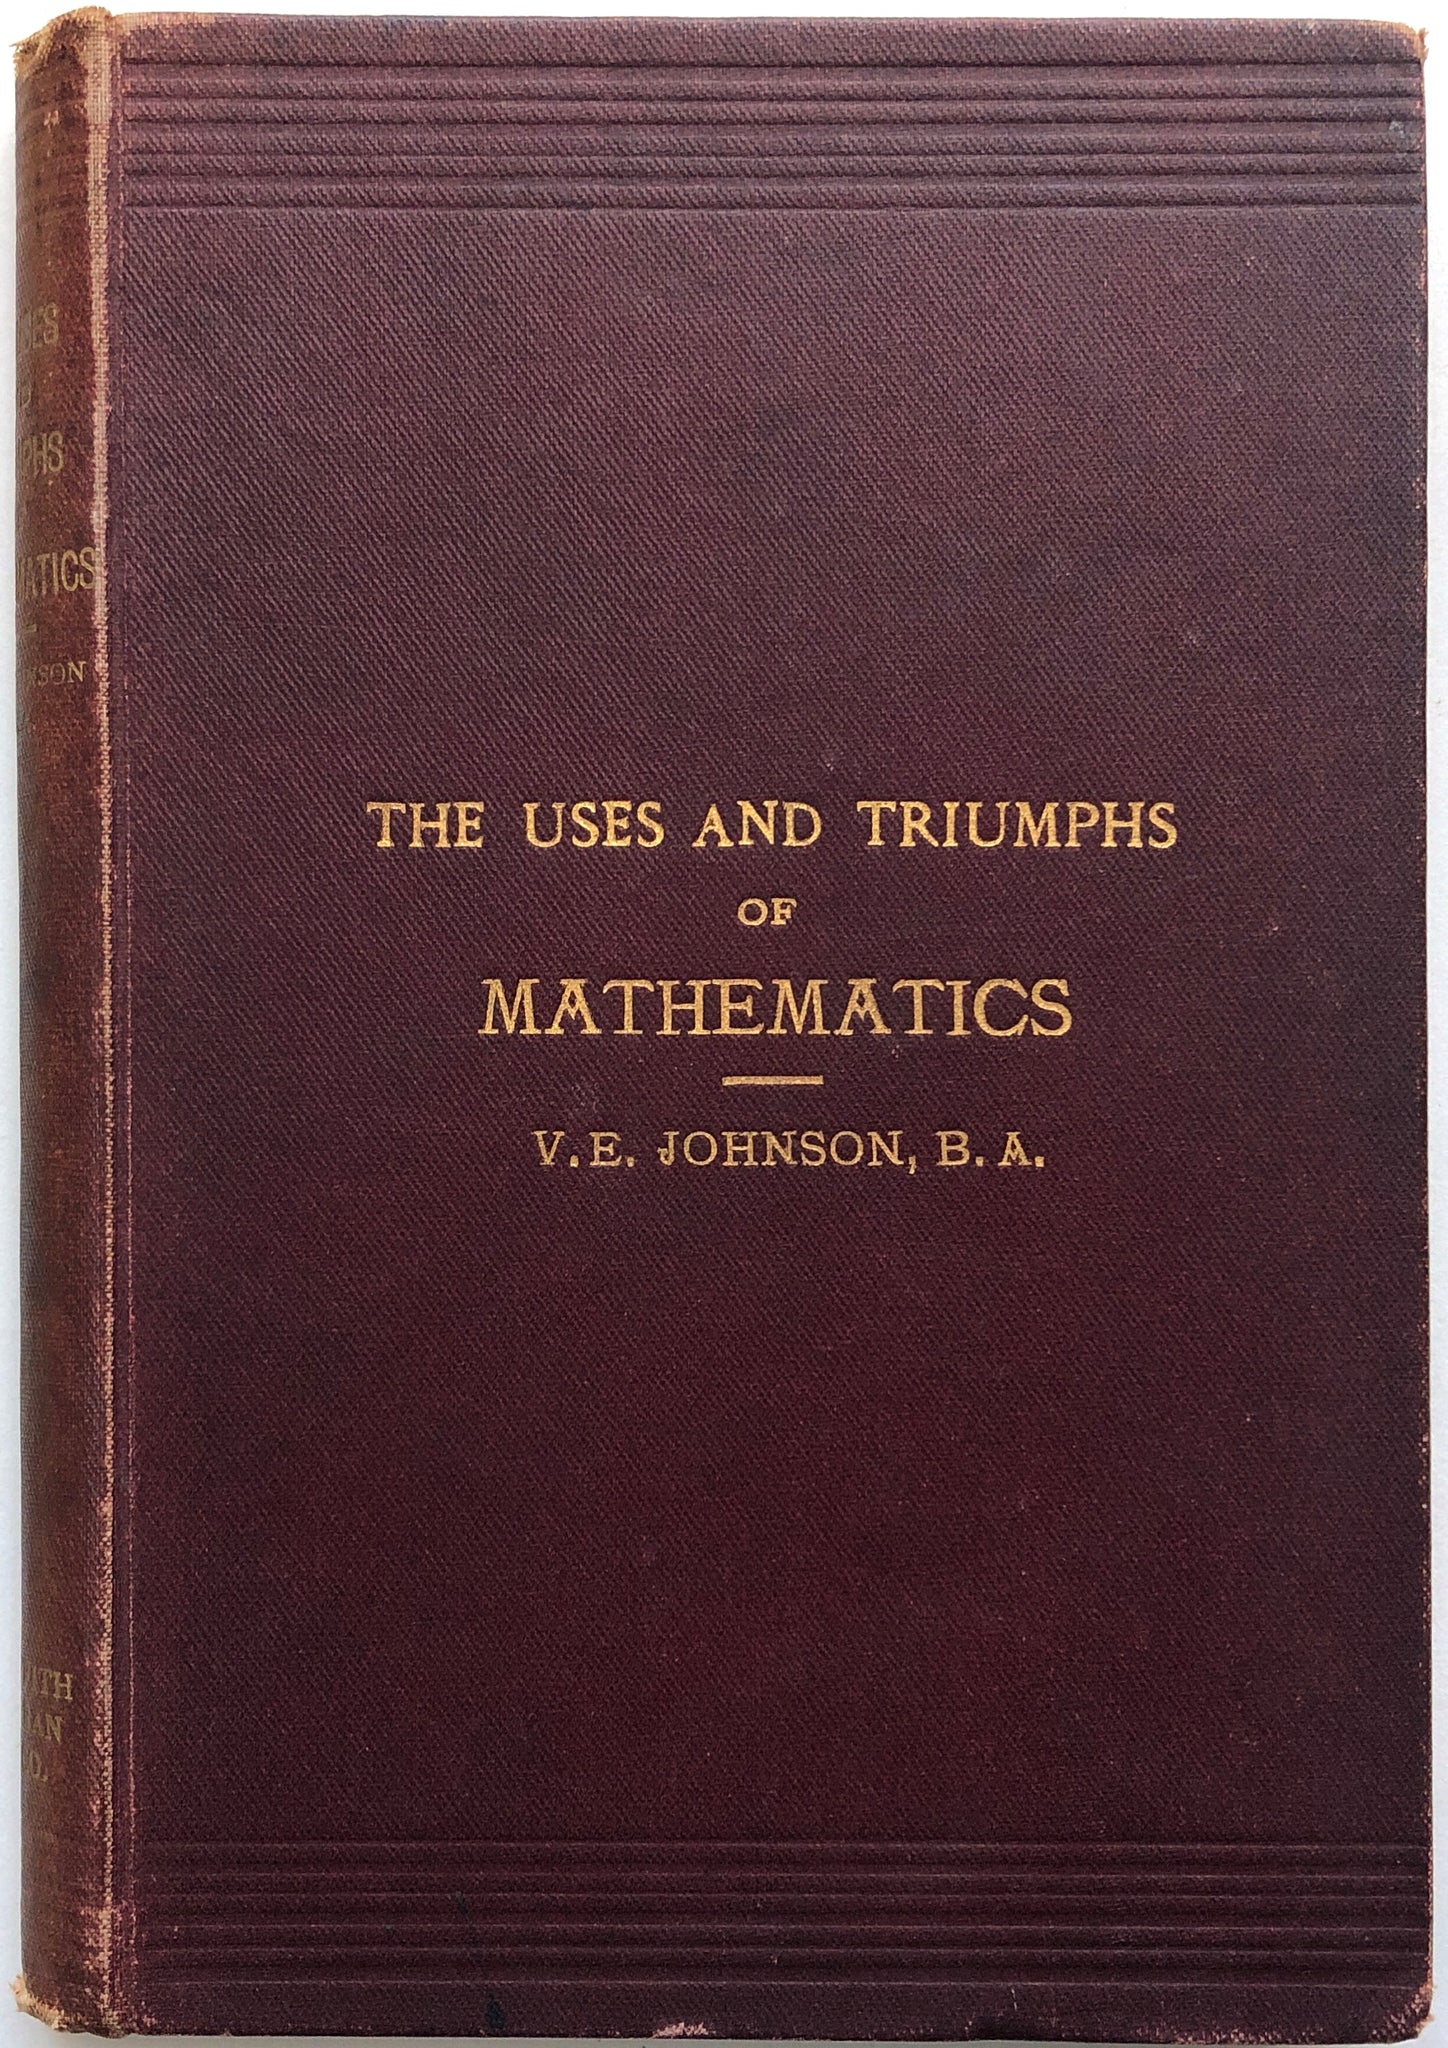 The Uses and Triumphs of Mathematics: Its Beauties and Attractions Popularly Treated in the Language of Everyday Life